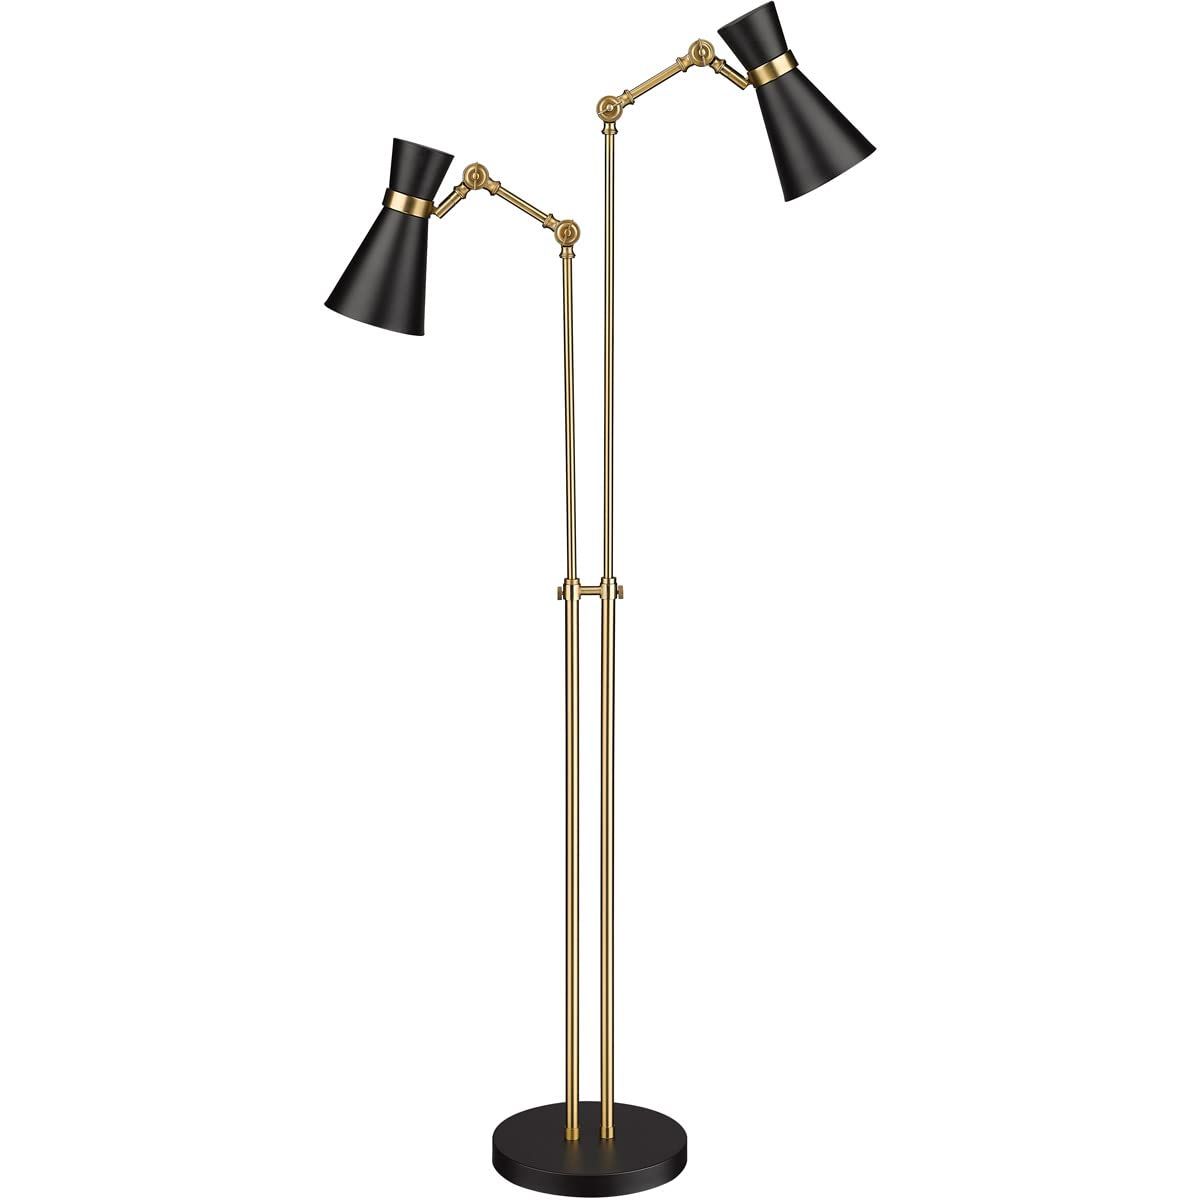 2 Arm Standing Lamps Pertaining To Most Current Amazon: Z Lite 728fl Mb Hbr Soriano – 2 Light Floor Lamp In Modern  Style 56.5 Inches Tall And  (View 8 of 10)